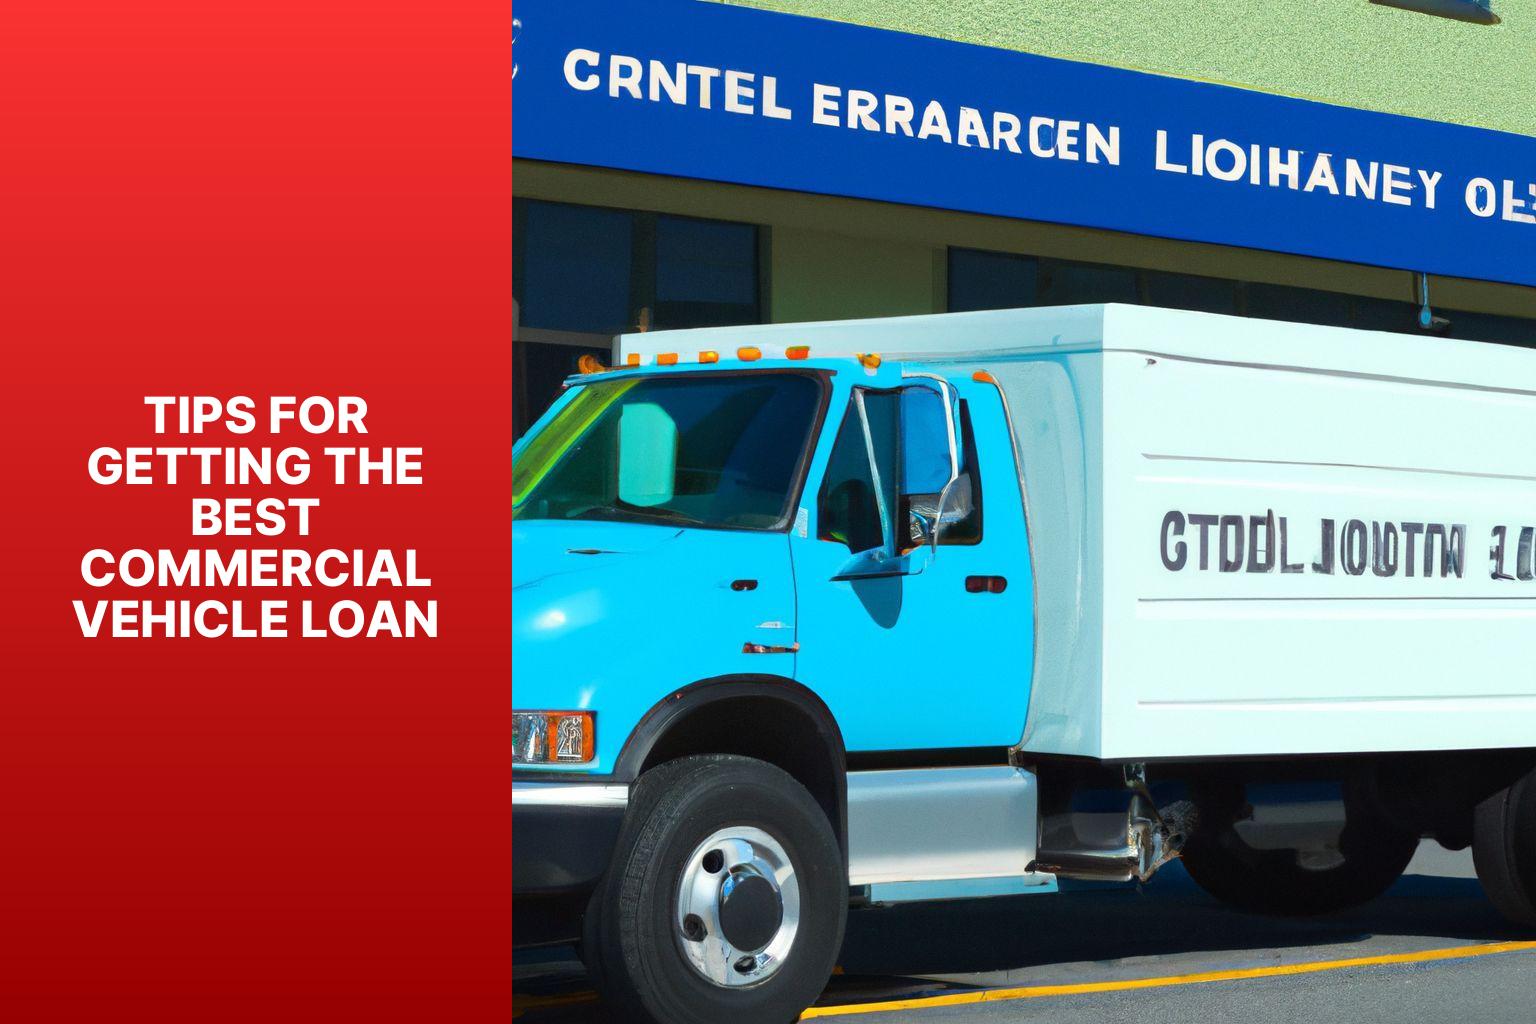 Tips for Getting the Best Commercial Vehicle Loan - Commercial Vehicle Loans Decoded: Using a Loan Calculator 